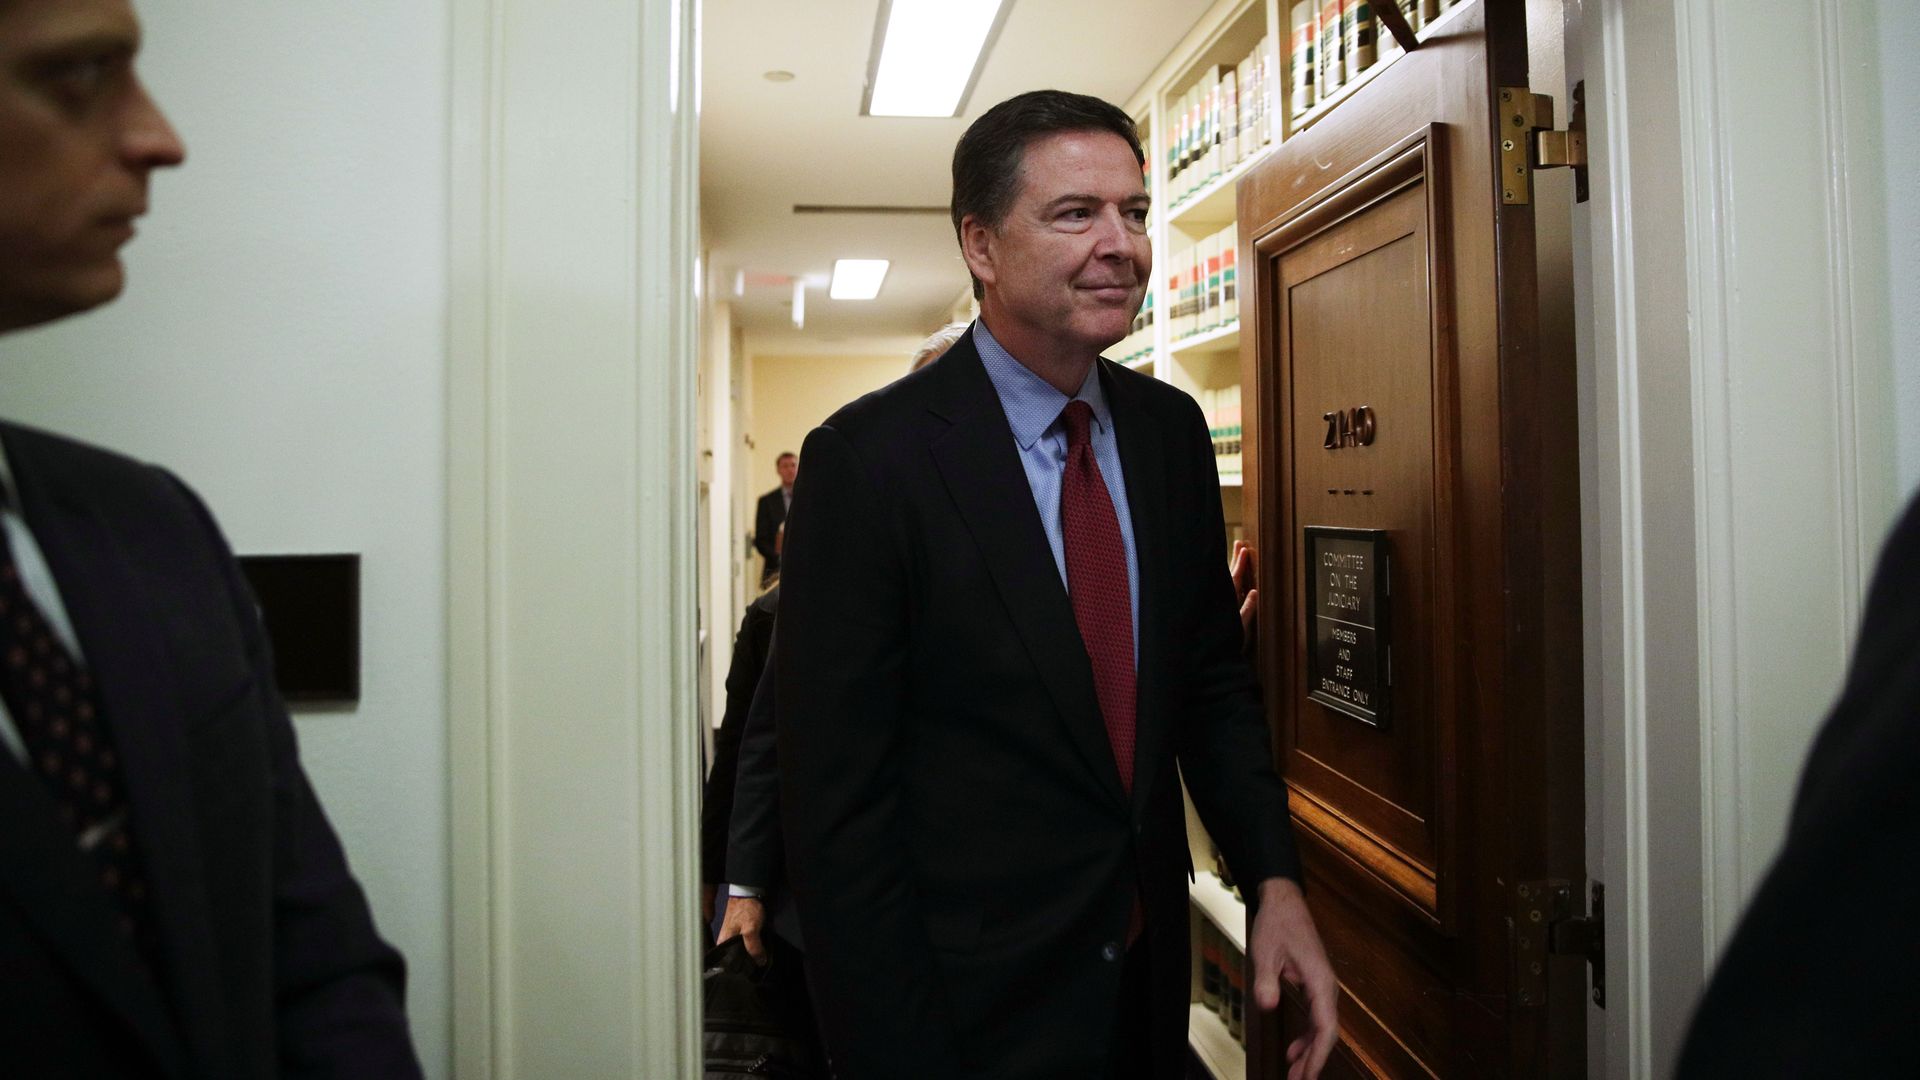 In this image, Comey walks out of a door